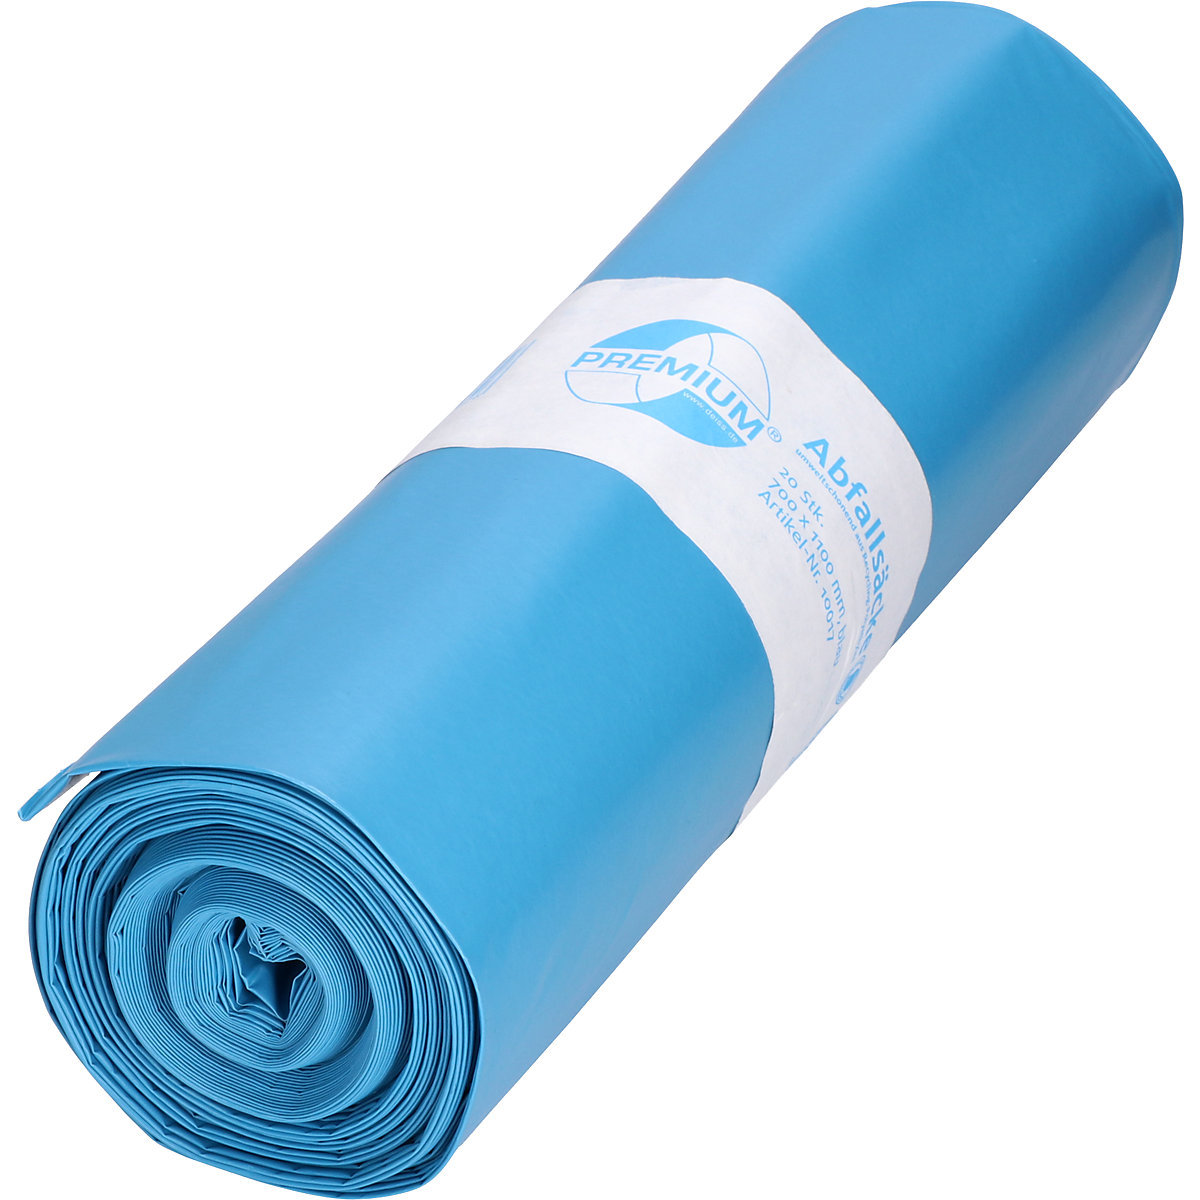 Heavy duty waste sacks LDPE, capacity 120 l, WxH 700 x 1100 mm, material thickness 80 µm, blue, pack of 200